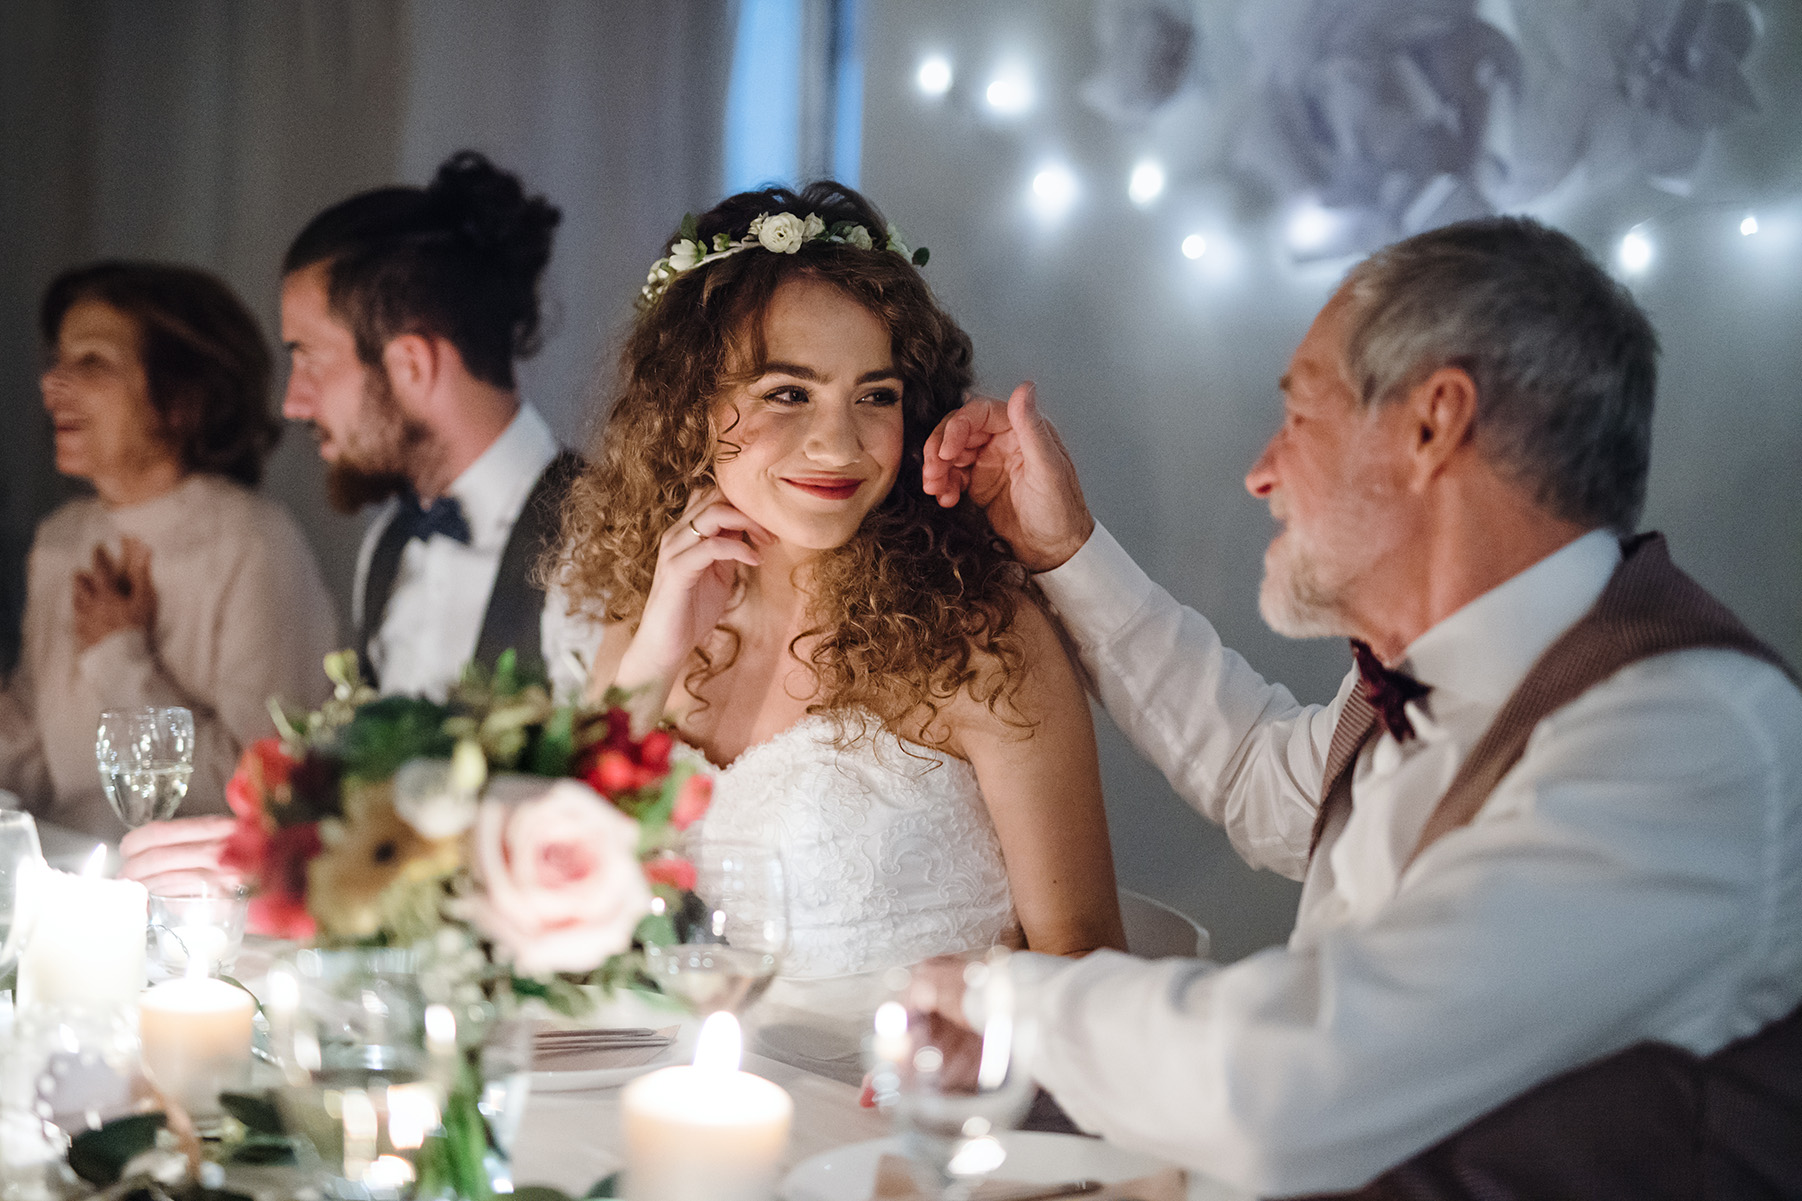 Bride and father smile at each other at wedding reception